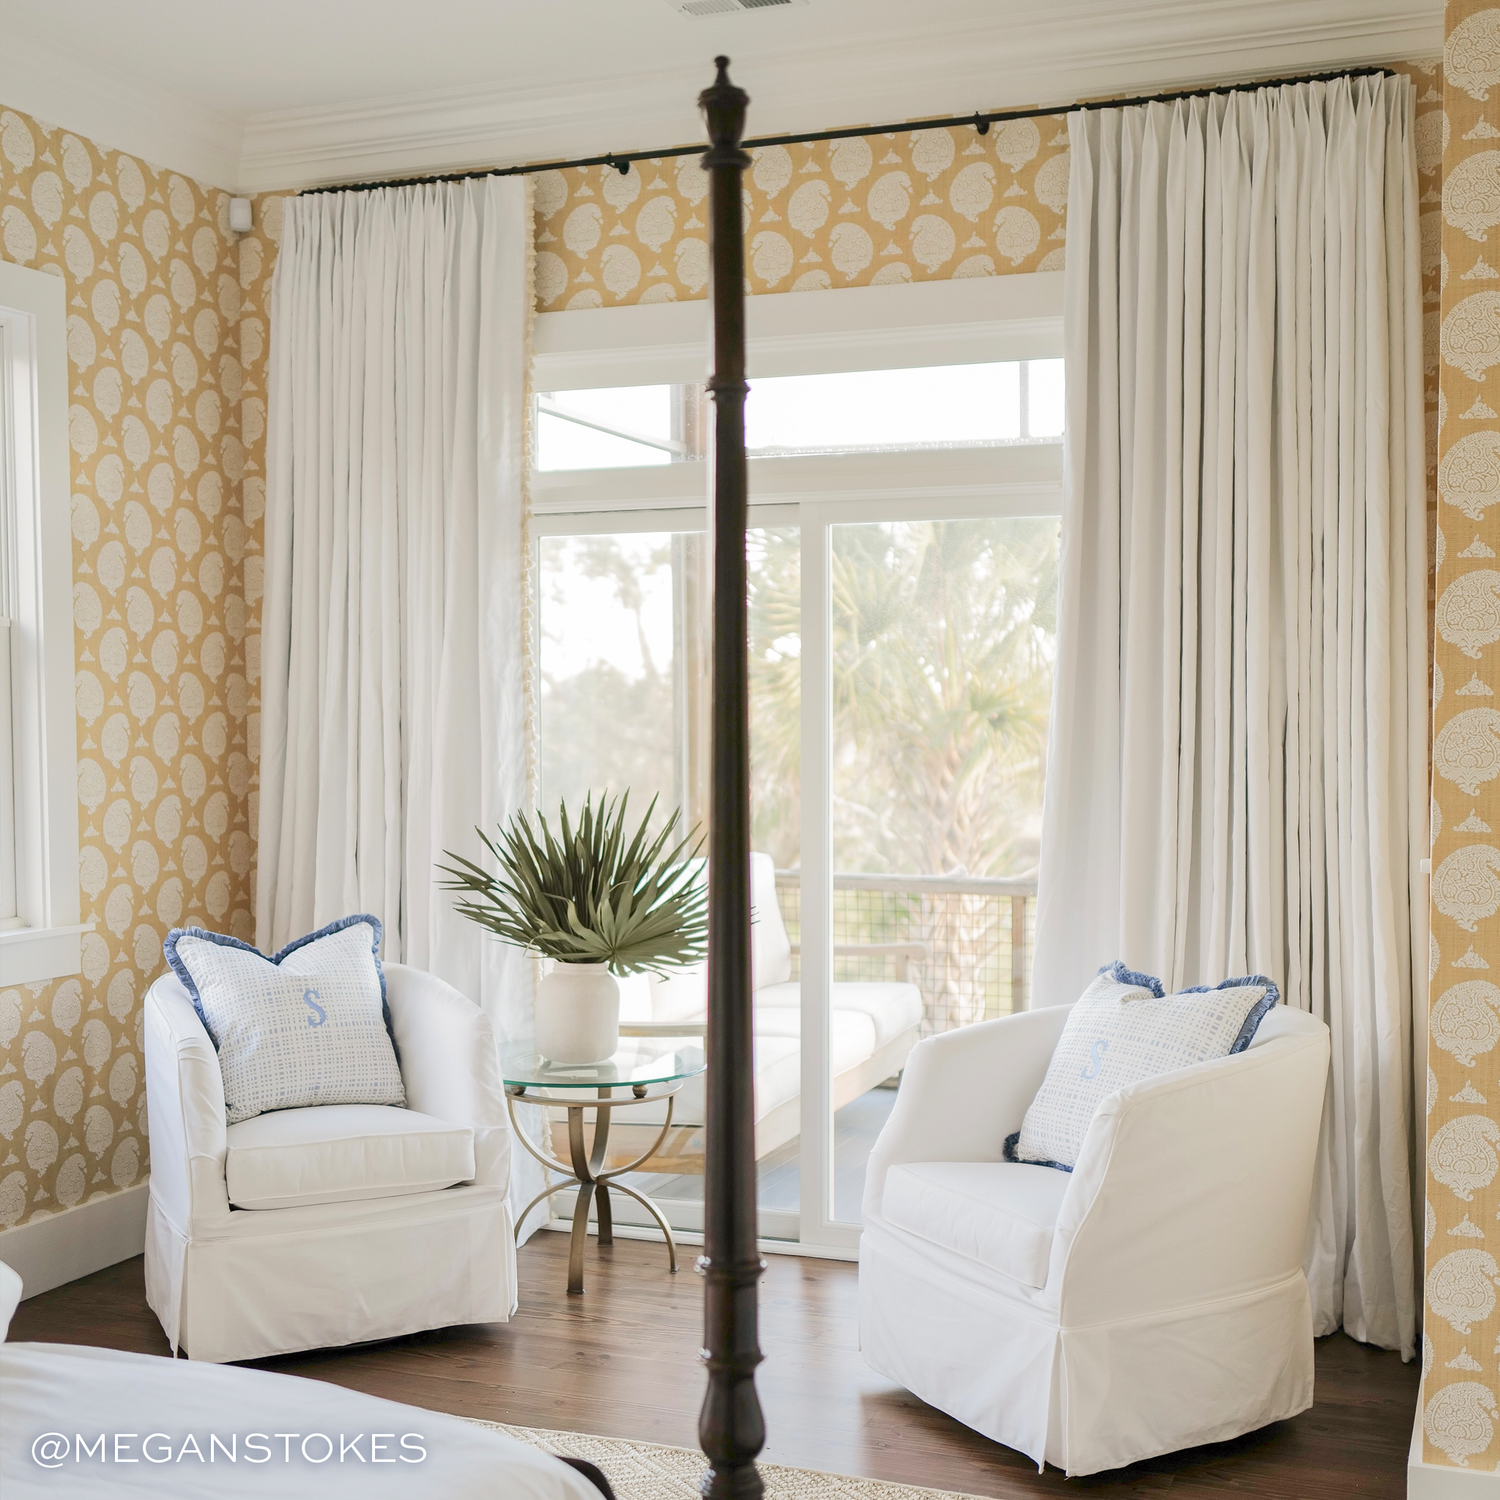 a yellow wallpapered room with white cotton curtains hanging from a black rod  behind two white chairs with light blue and white plaid pillows and a green plant between them